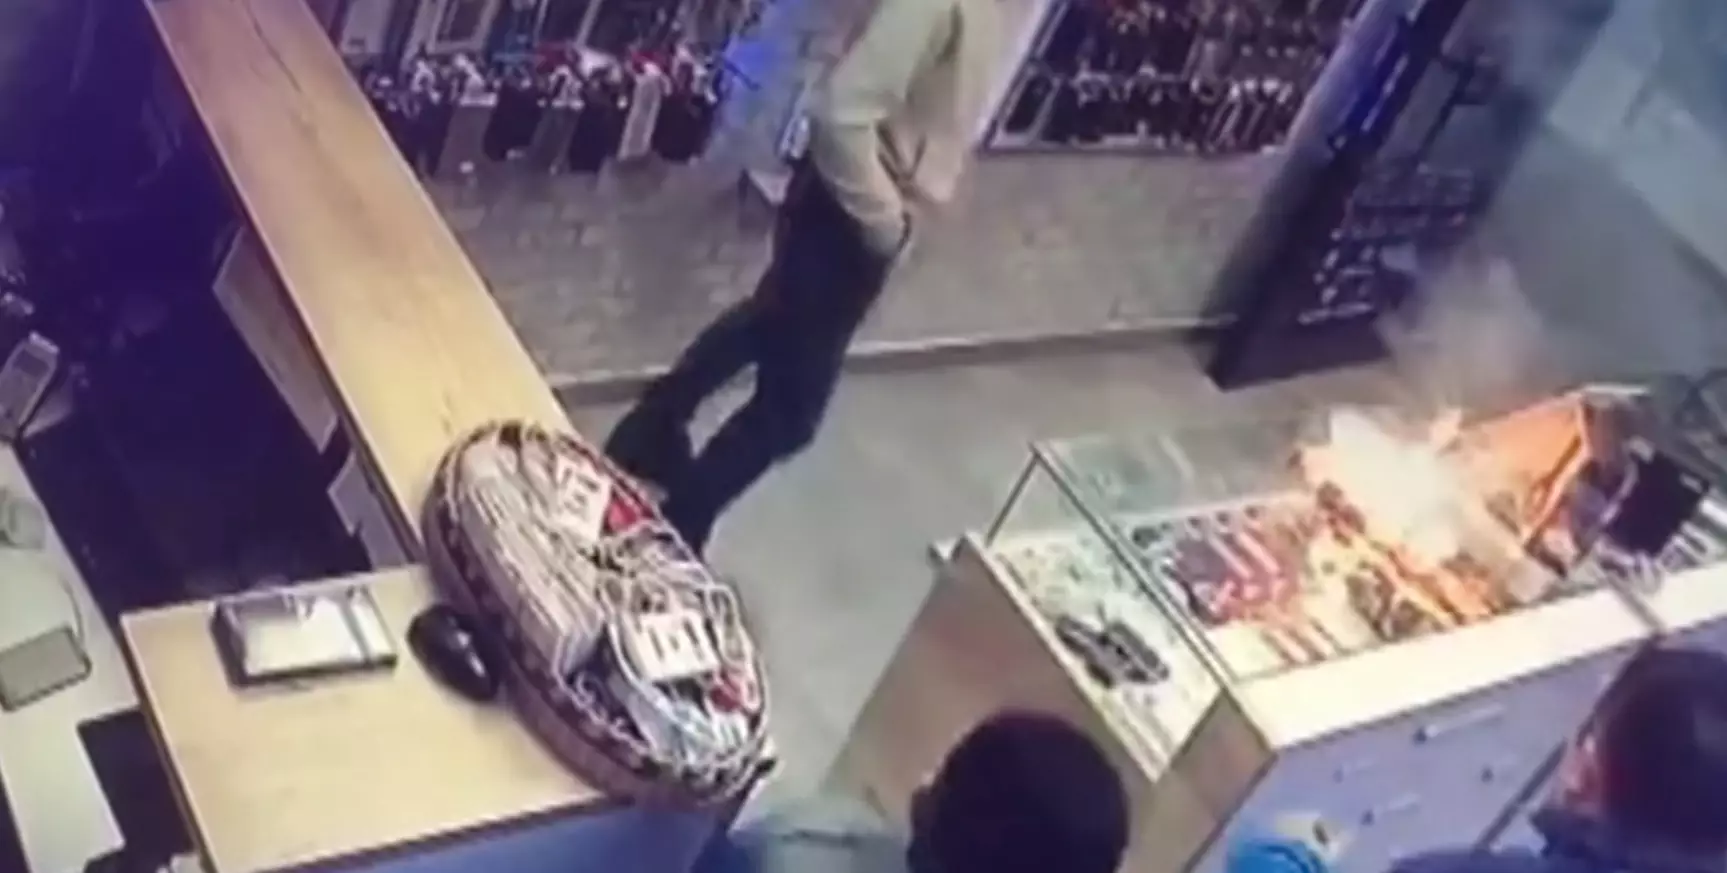 Phone turns into a fireball in repairman's hands.